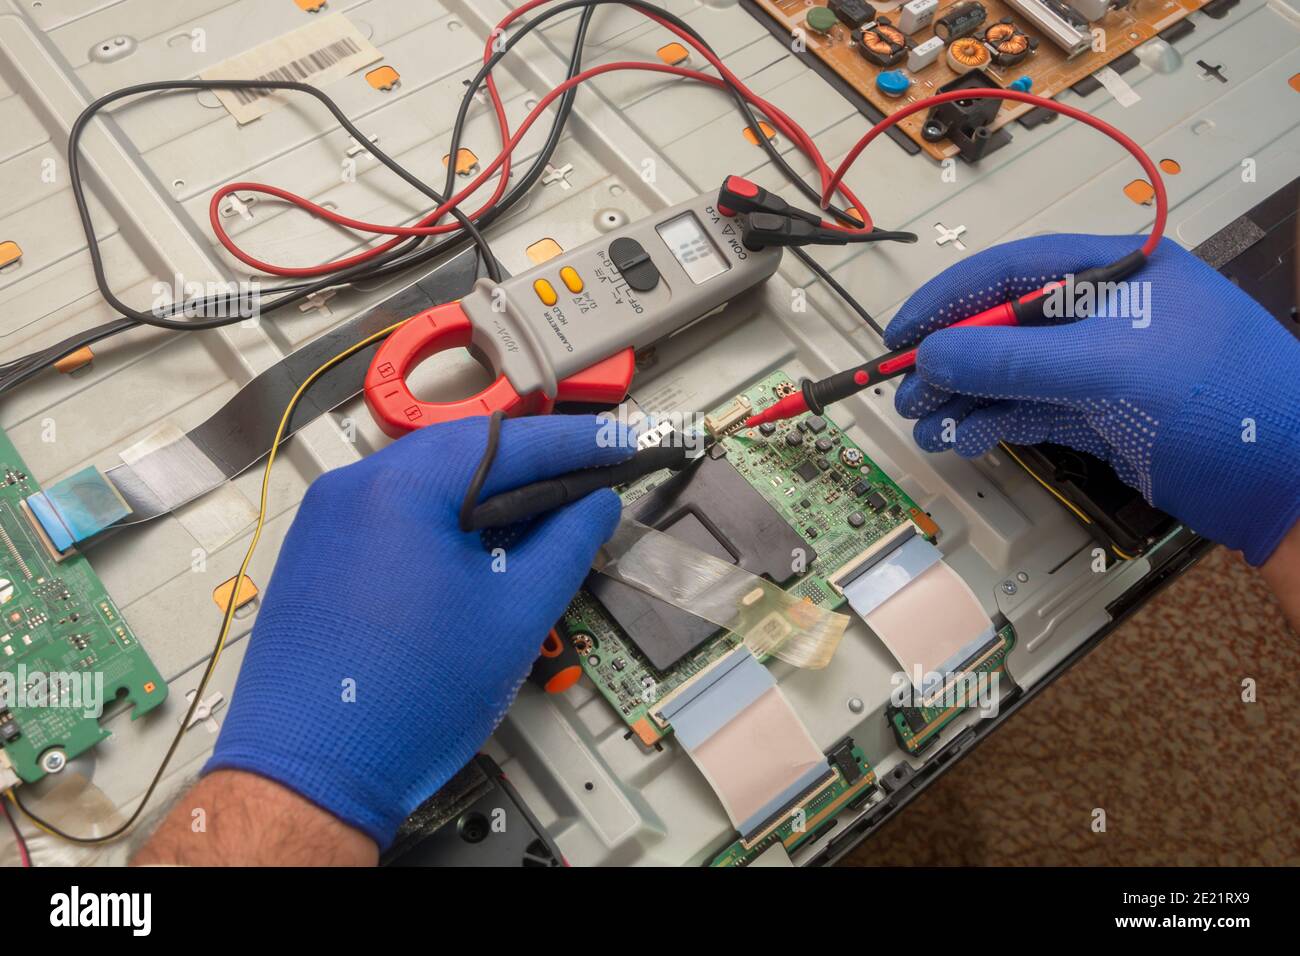 Repair of LCD TV in service center. Diagnostics of printed circuit board with multimeter probe. Selective focus. Stock Photo